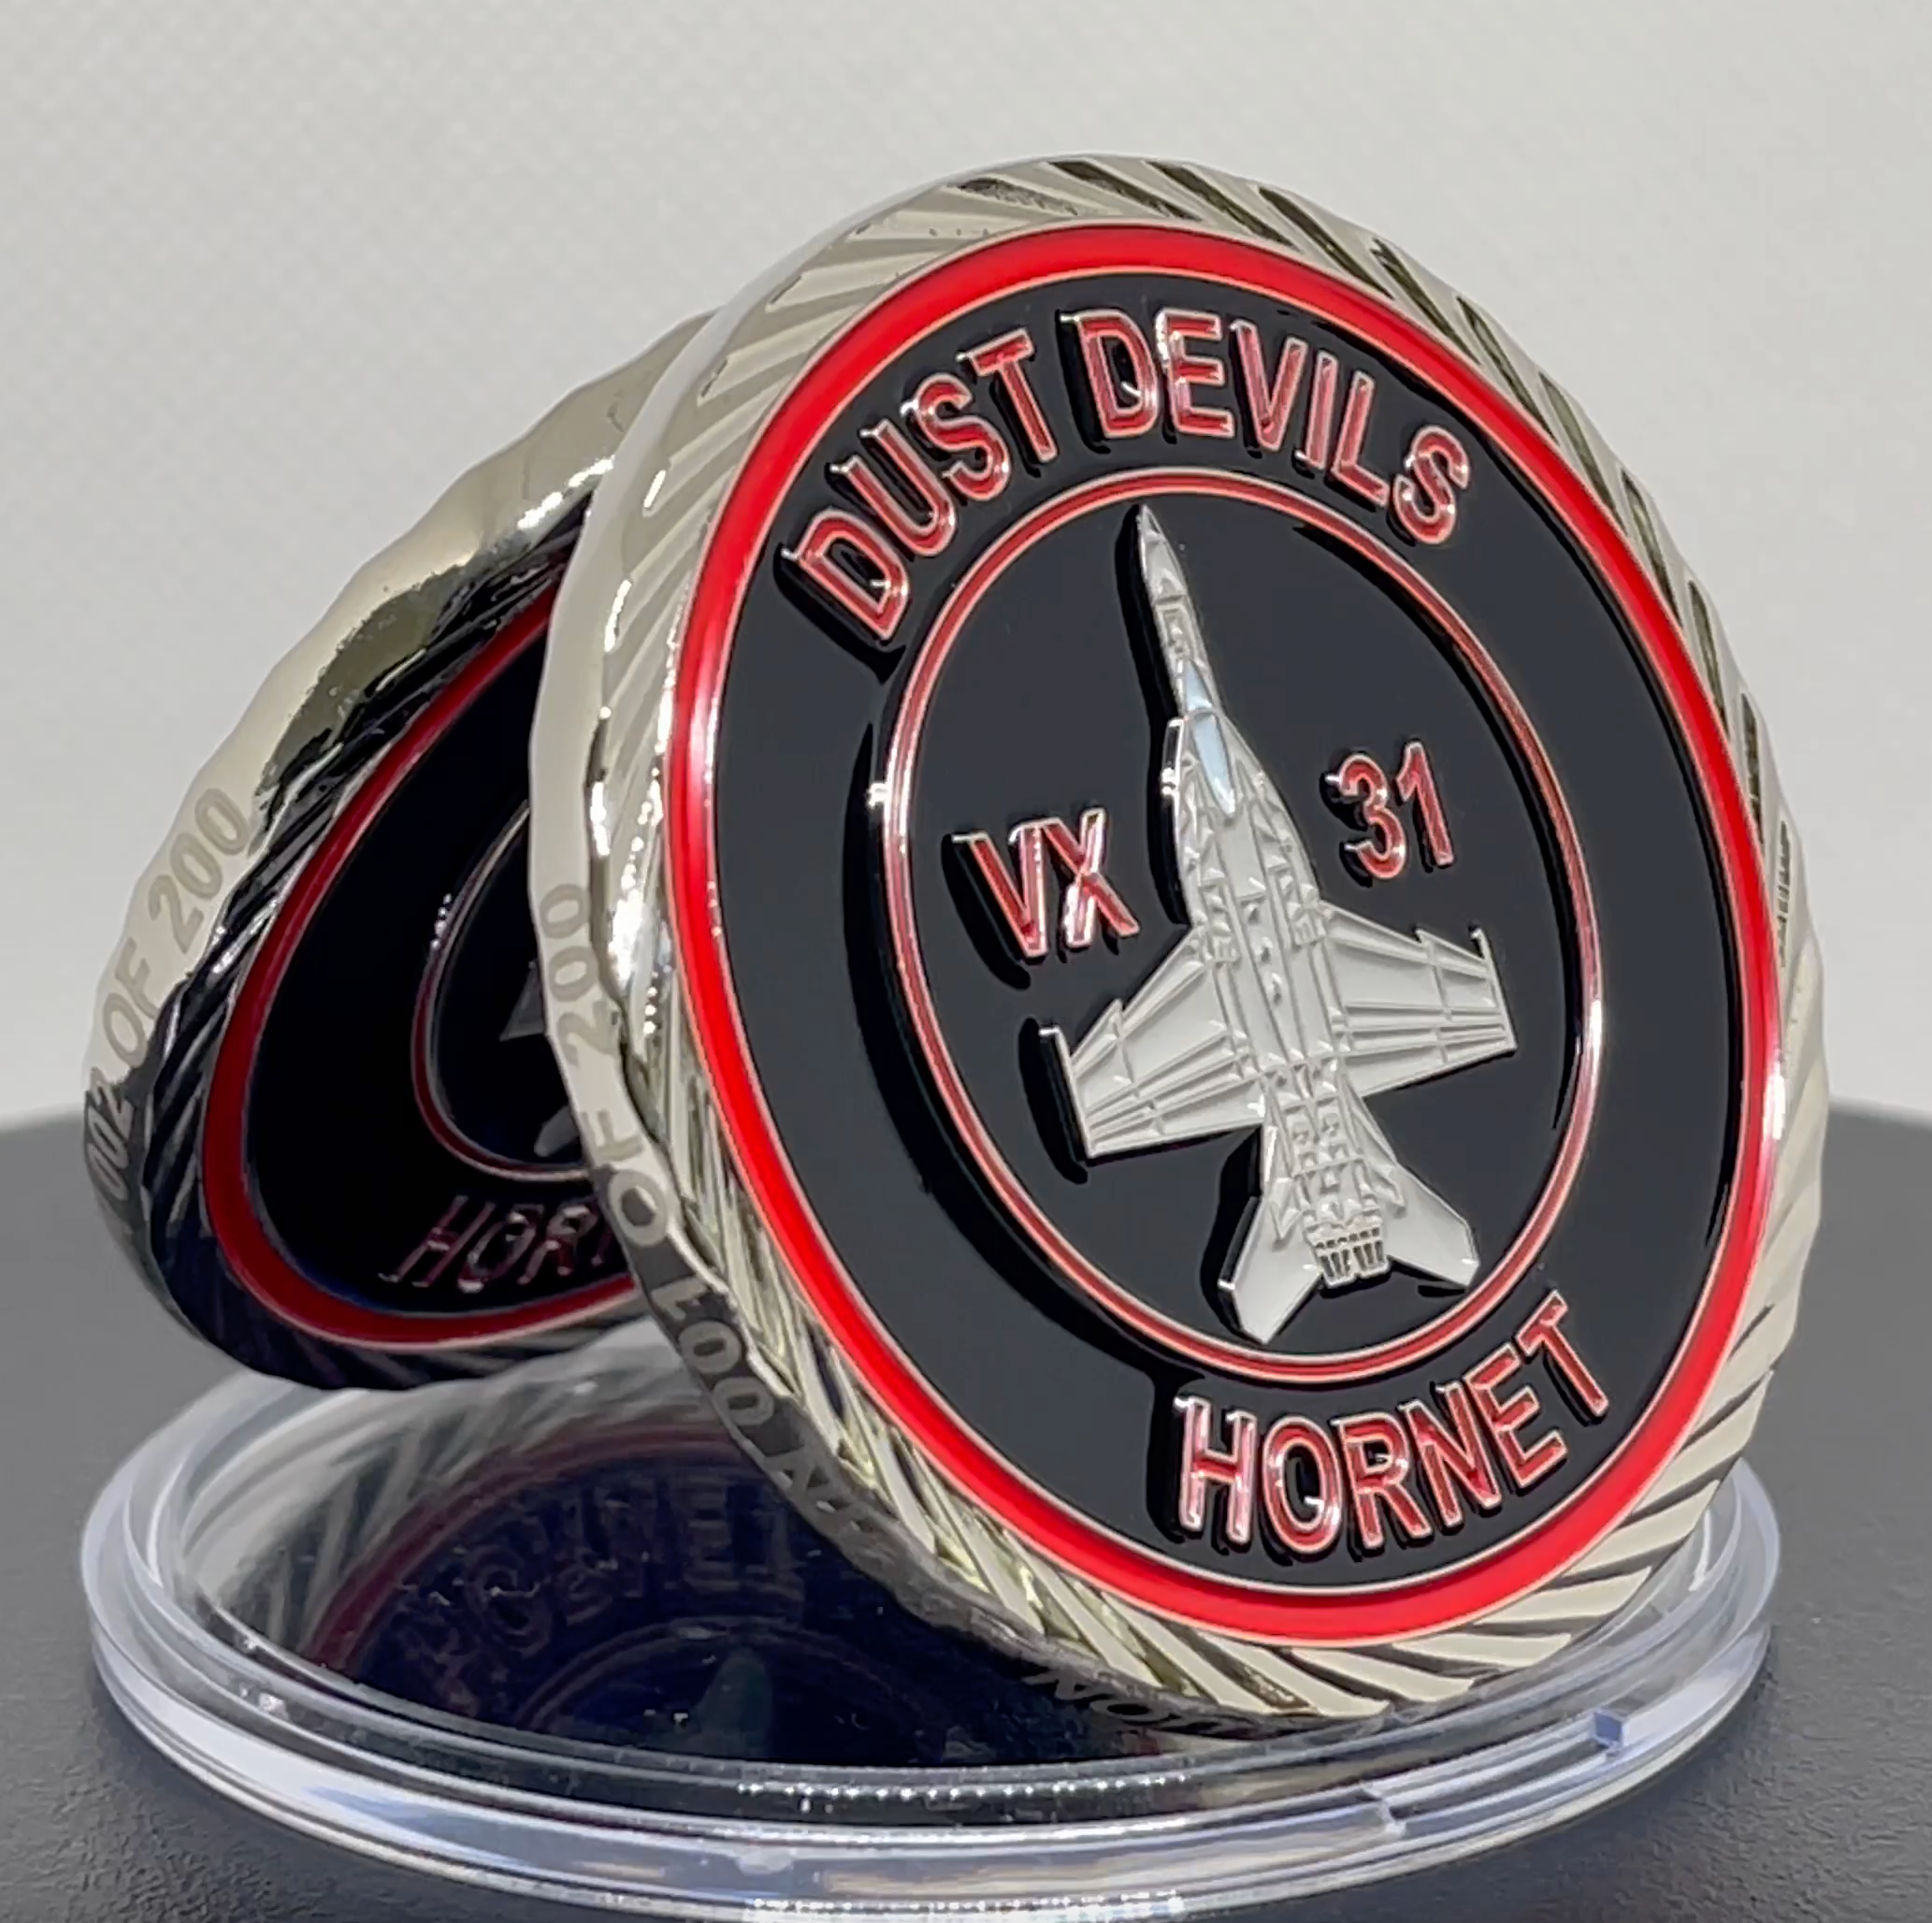 VX-31 "Dust Devils" Top Gun Fan Collector's Coin - Limited Edition